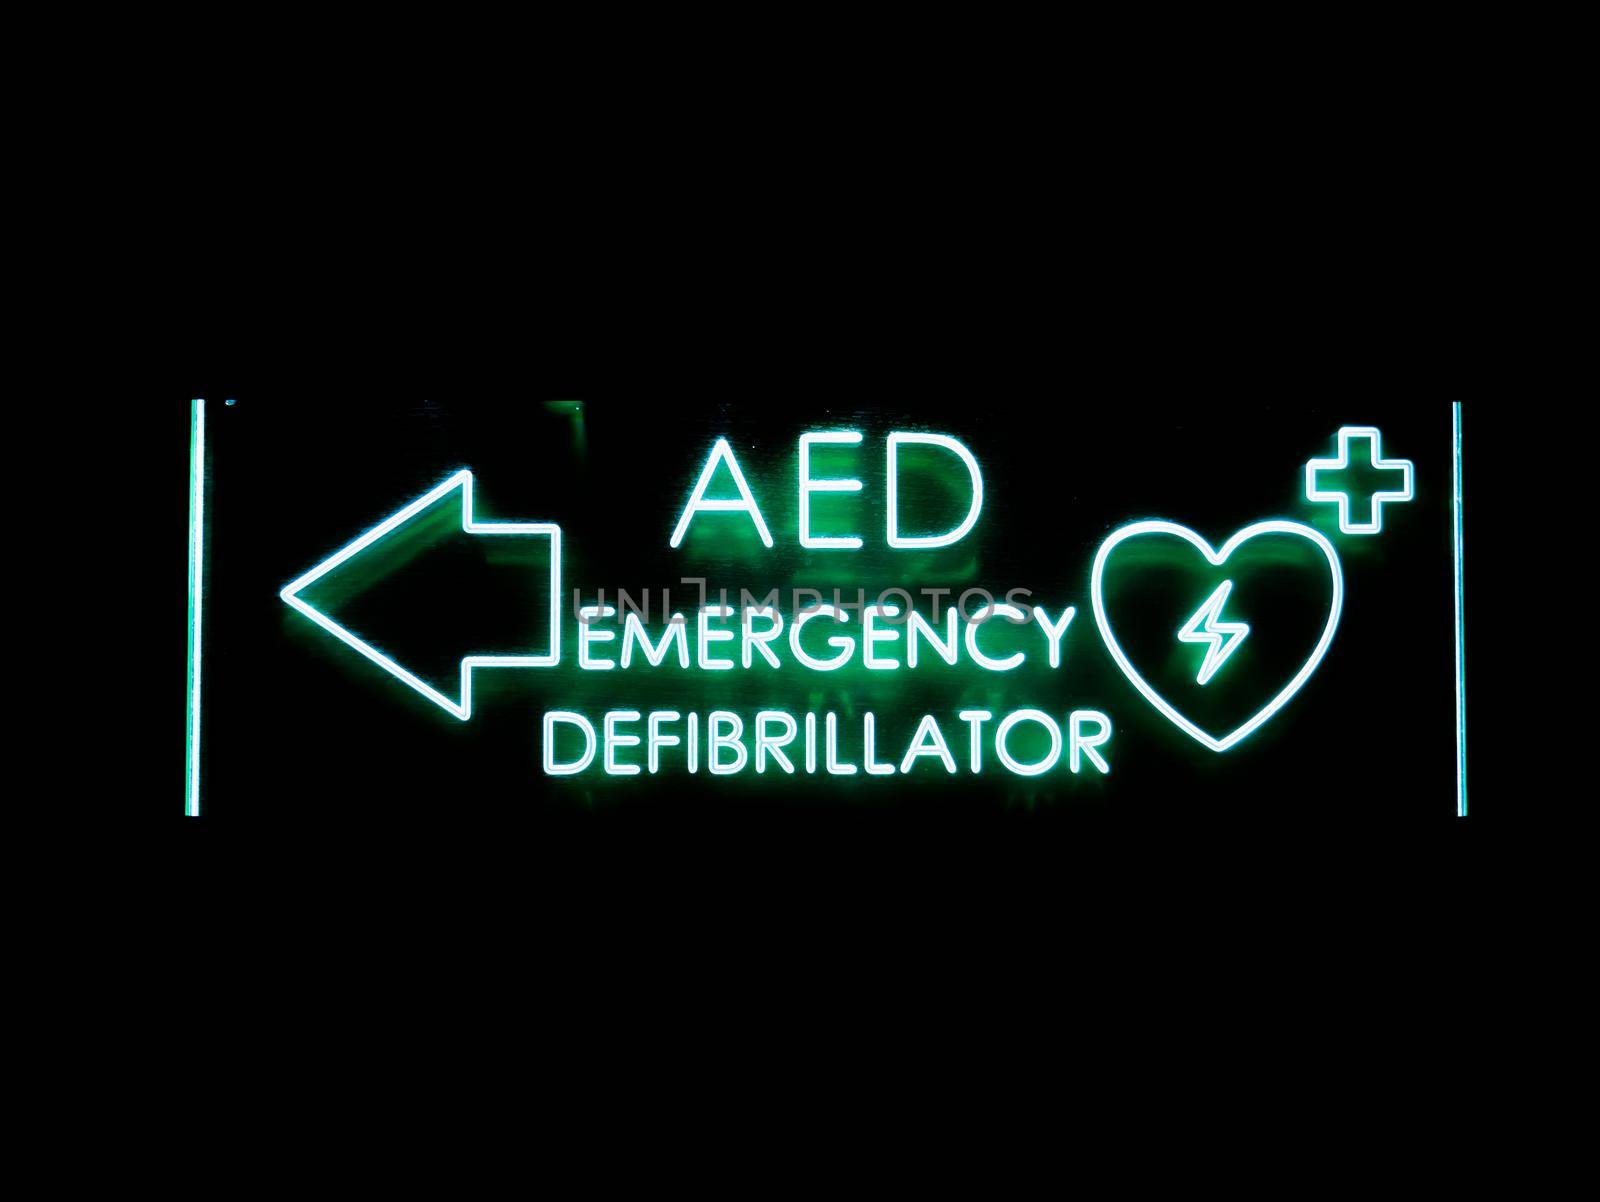 Emergency defibrillator DEA or AED sign lighted heart